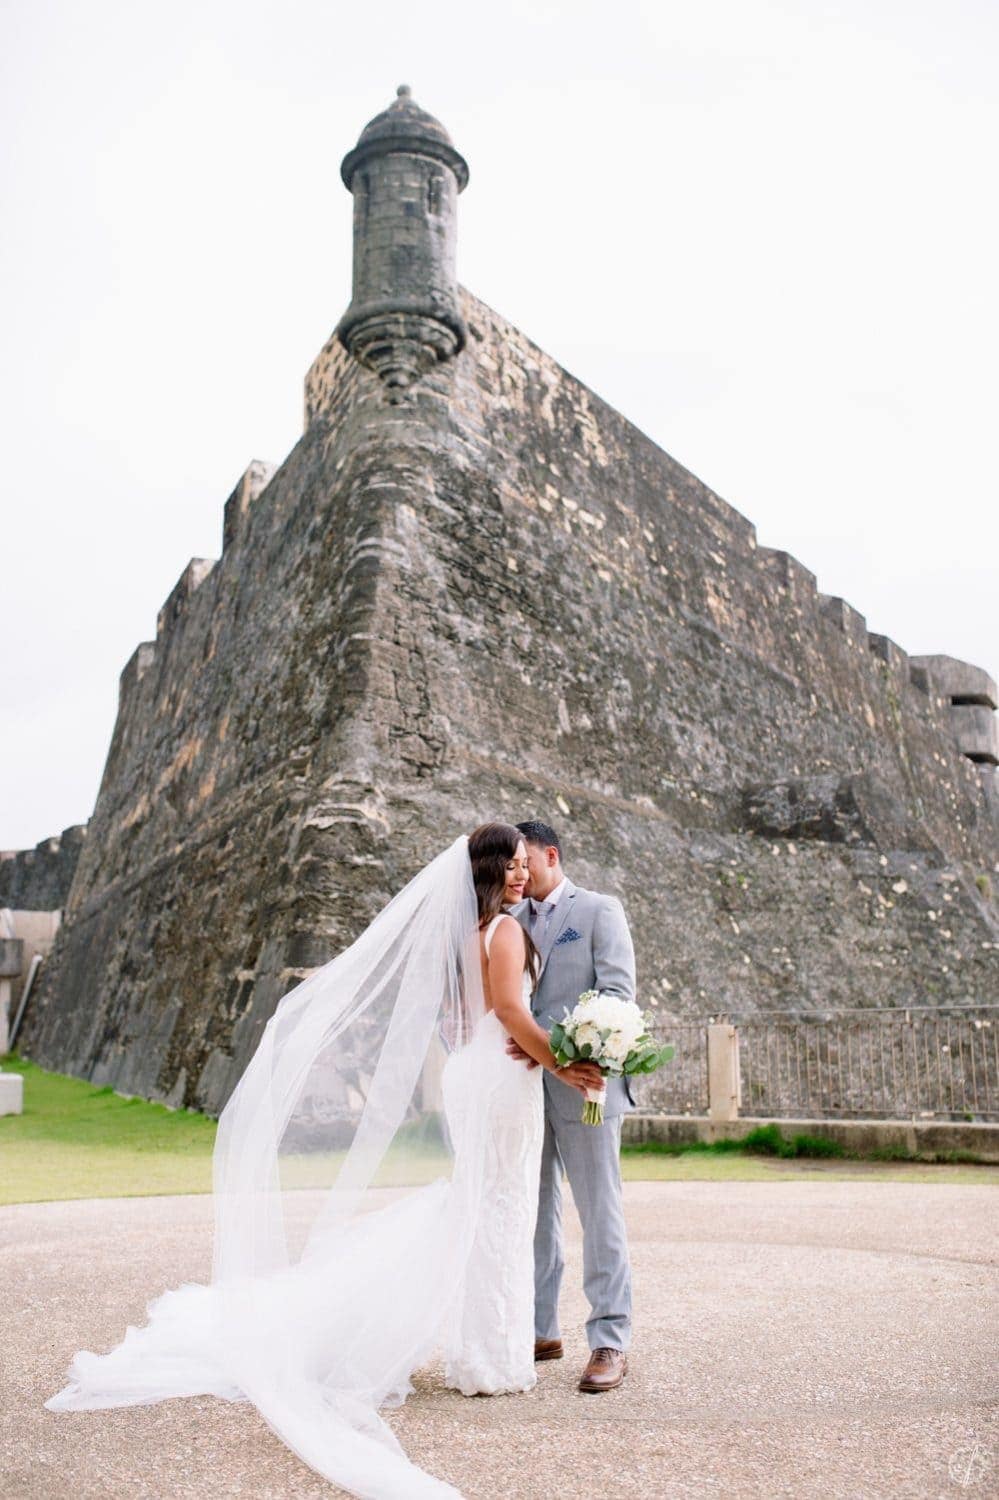 First look session and wedding portraits at Castillo San Cristobal by Puerto Rico wedding photographer